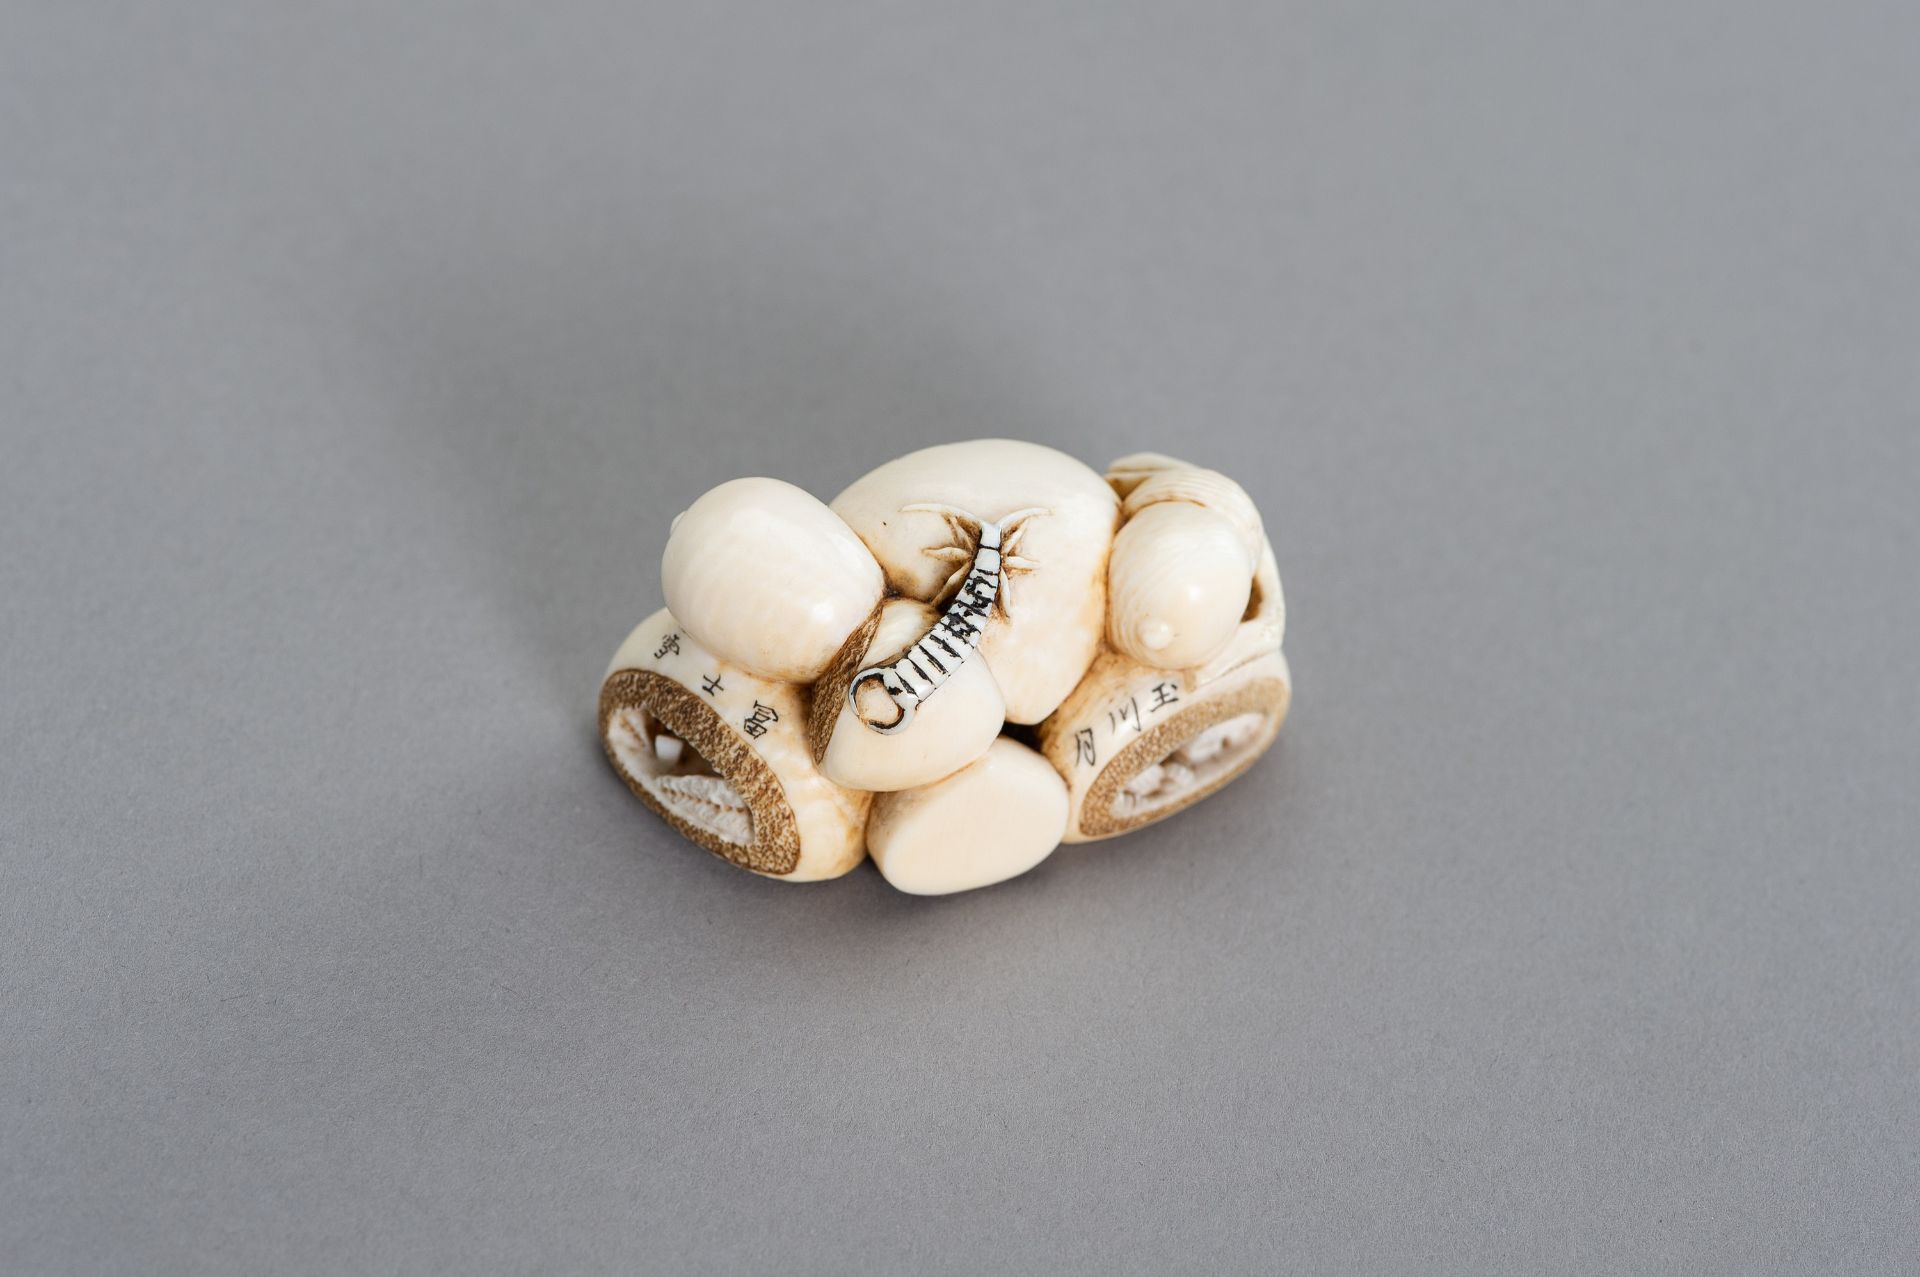 GYOKUHOSAI: AN IVORY NETSUSKE OF A GROUP OF FRUITS AND NUTS - Image 2 of 3